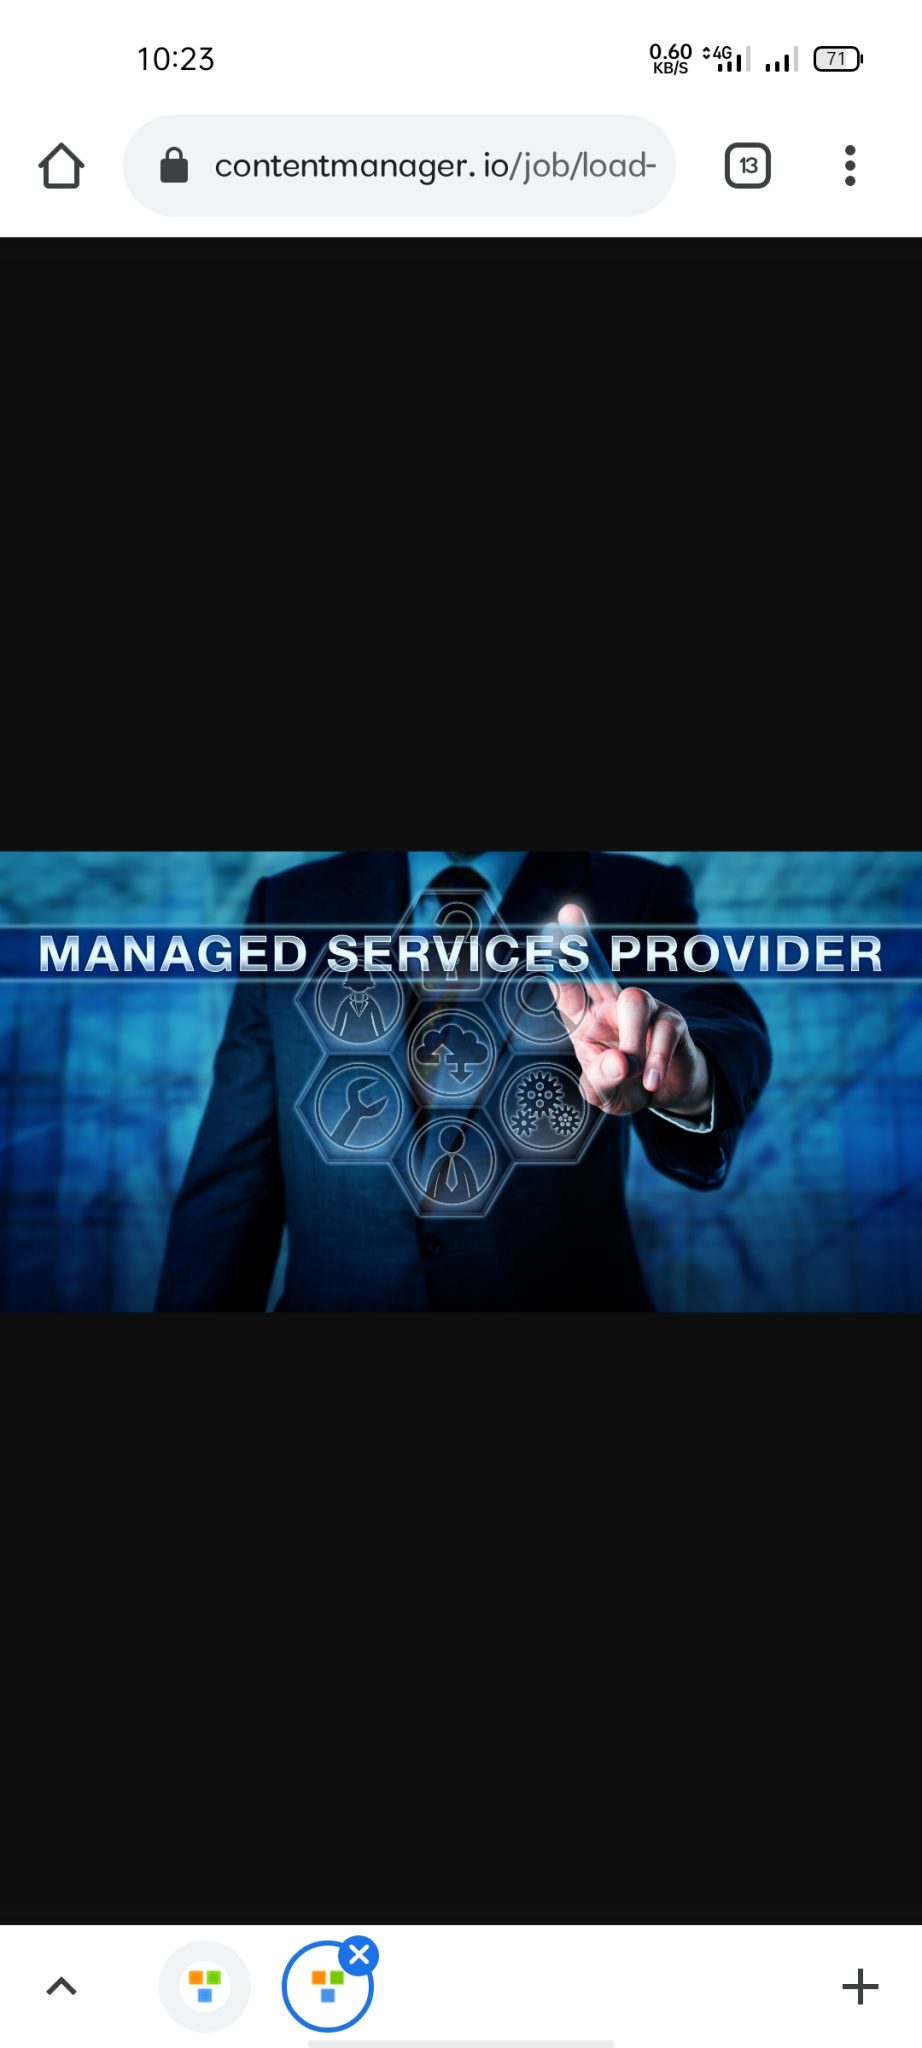 How to Market Your Managed Service Provider Business